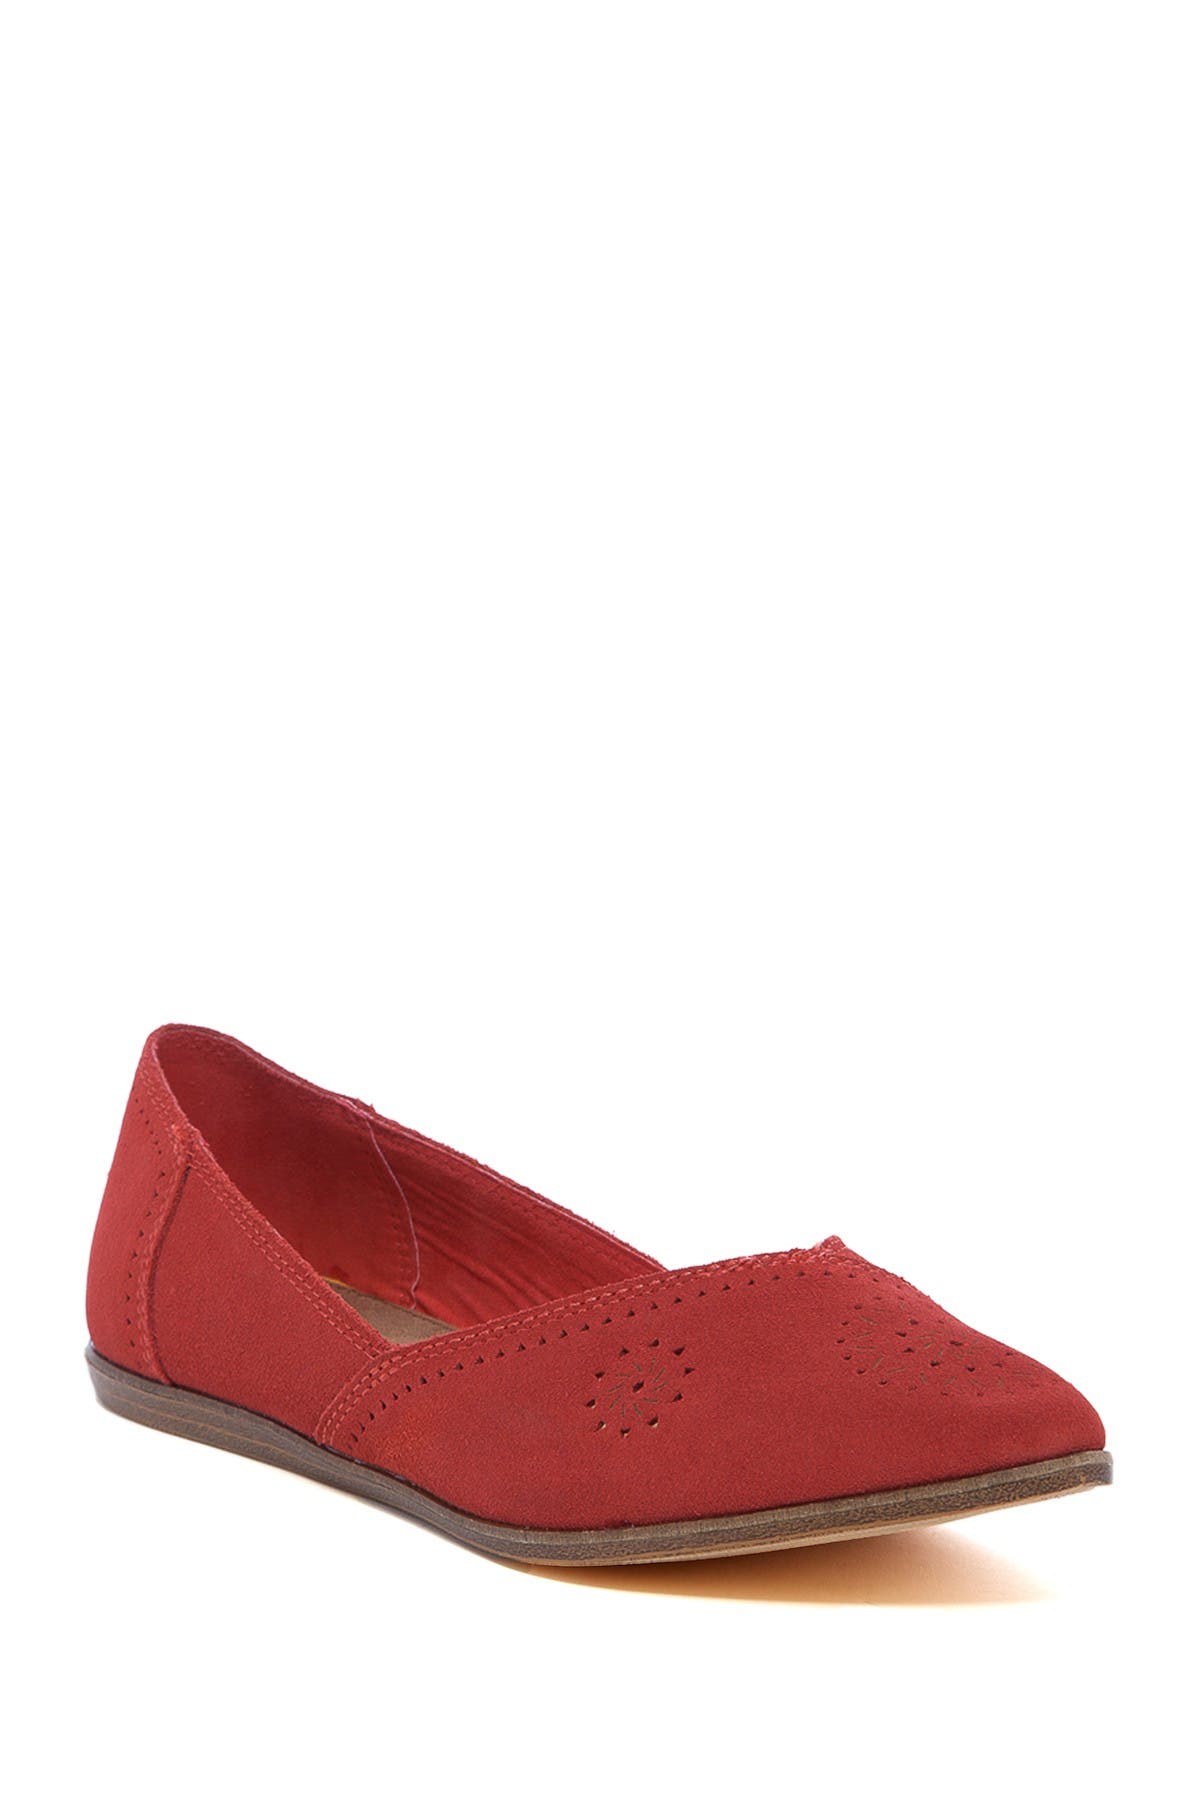 toms perforated flats